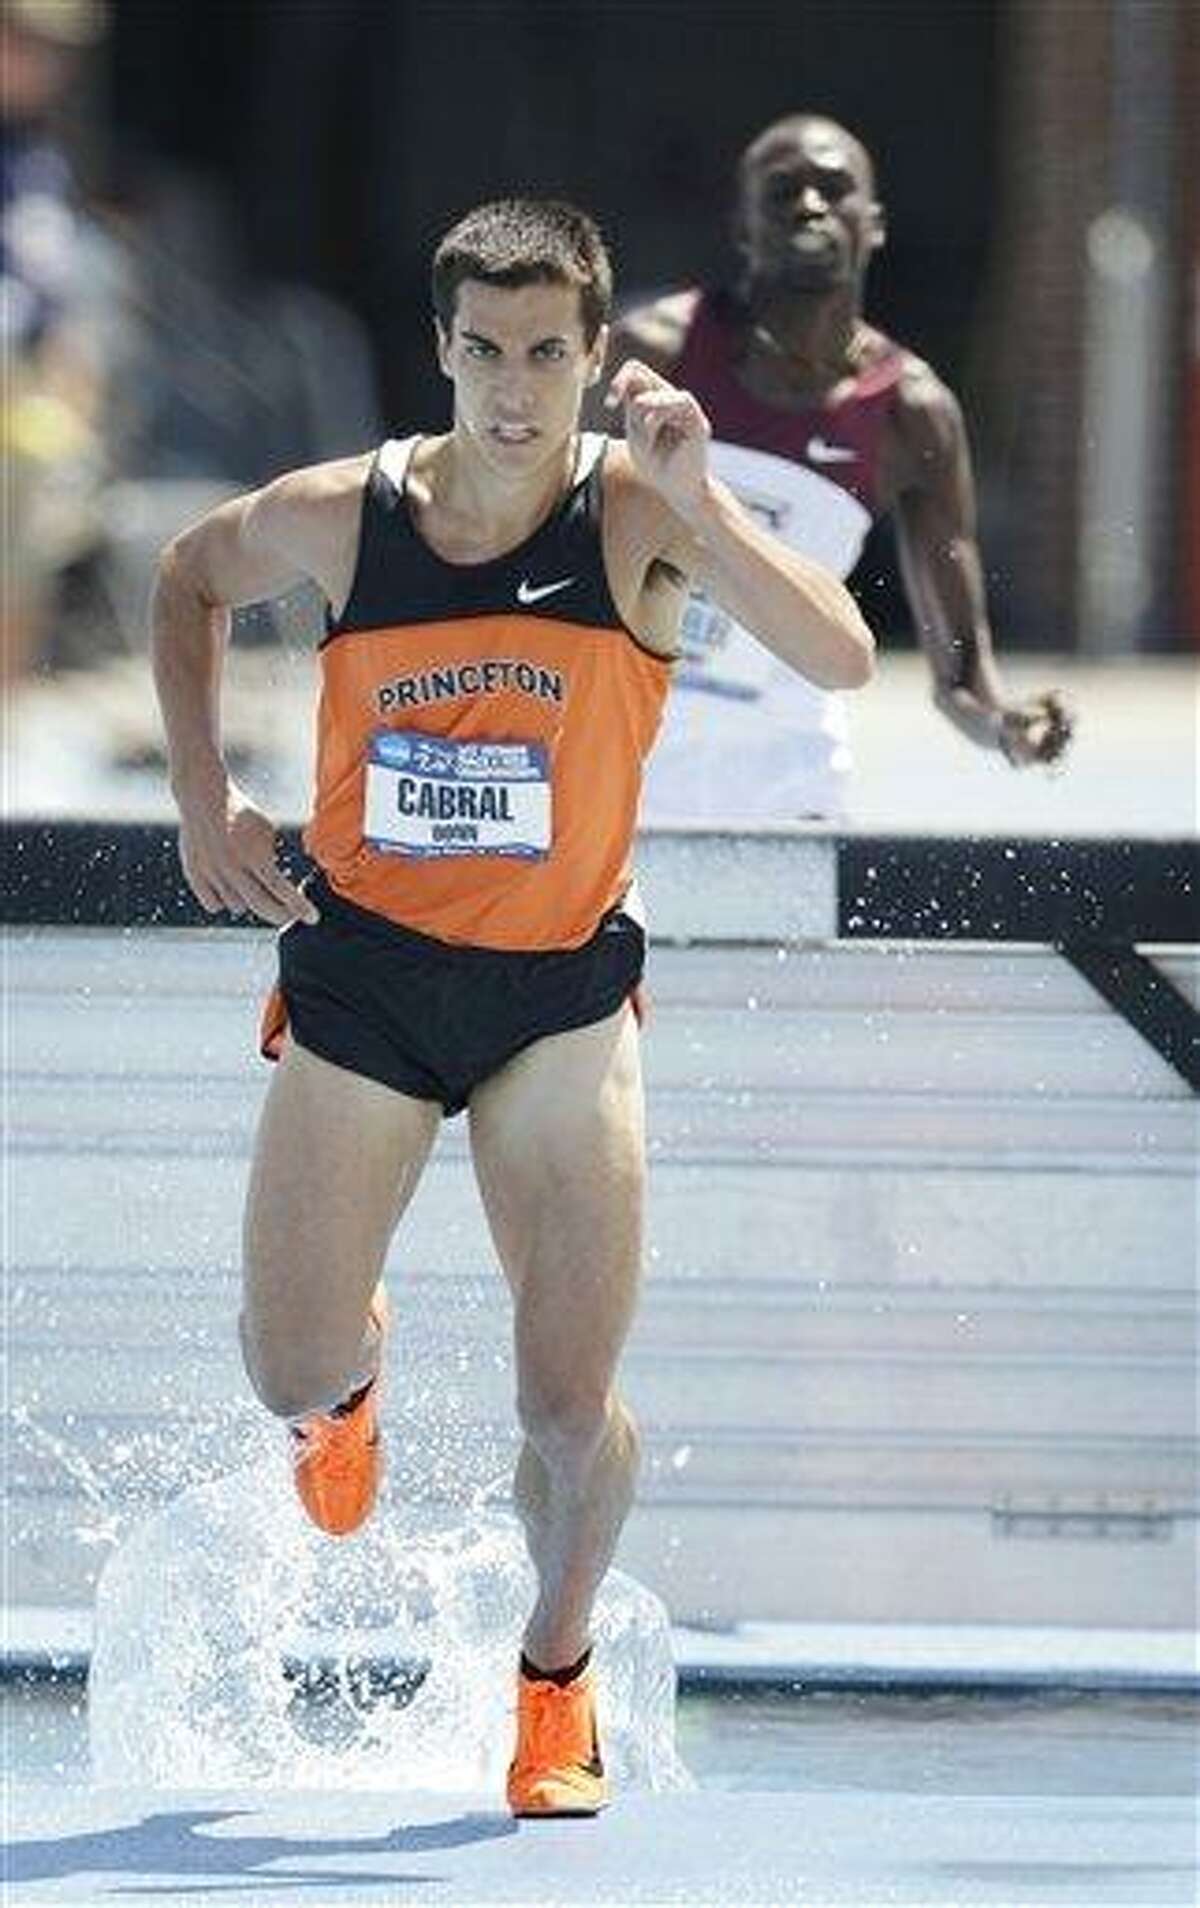 Princeton's Donn Cabral leads during the final lap of the men's 3,000-meter steeplechase at the NCAA outdoor track and field championships, Saturday, June 9, 2012, at Drake Stadium in Des Moines, Iowa. (AP Photo/Charlie Neibergall)